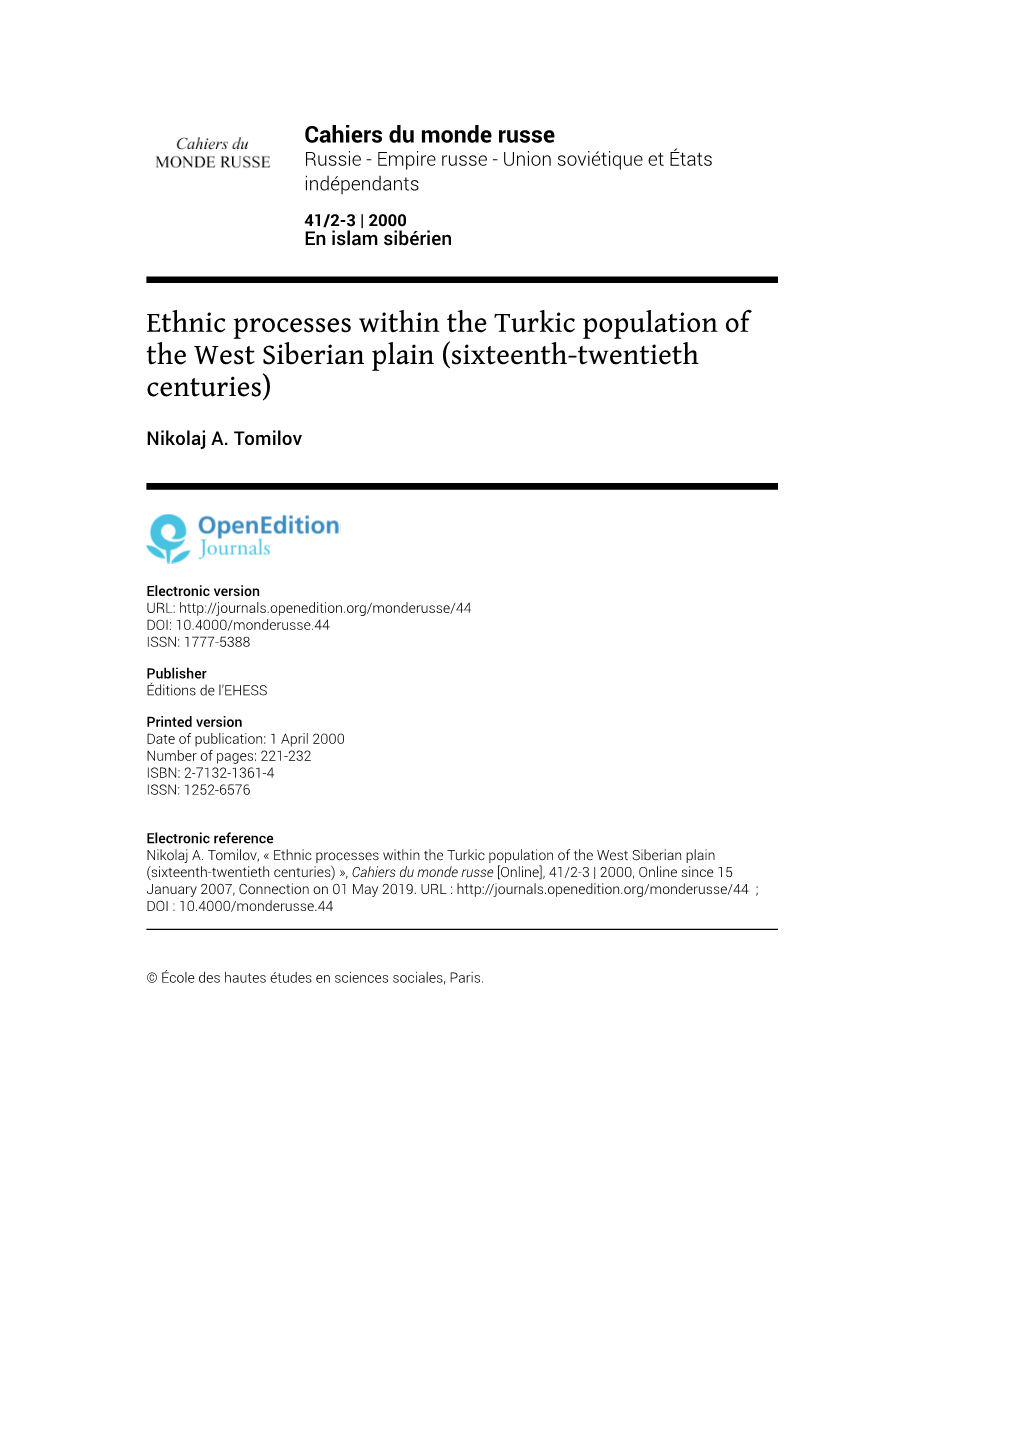 Ethnic Processes Within the Turkic Population of the West Siberian Plain (Sixteenth-Twentieth Centuries)